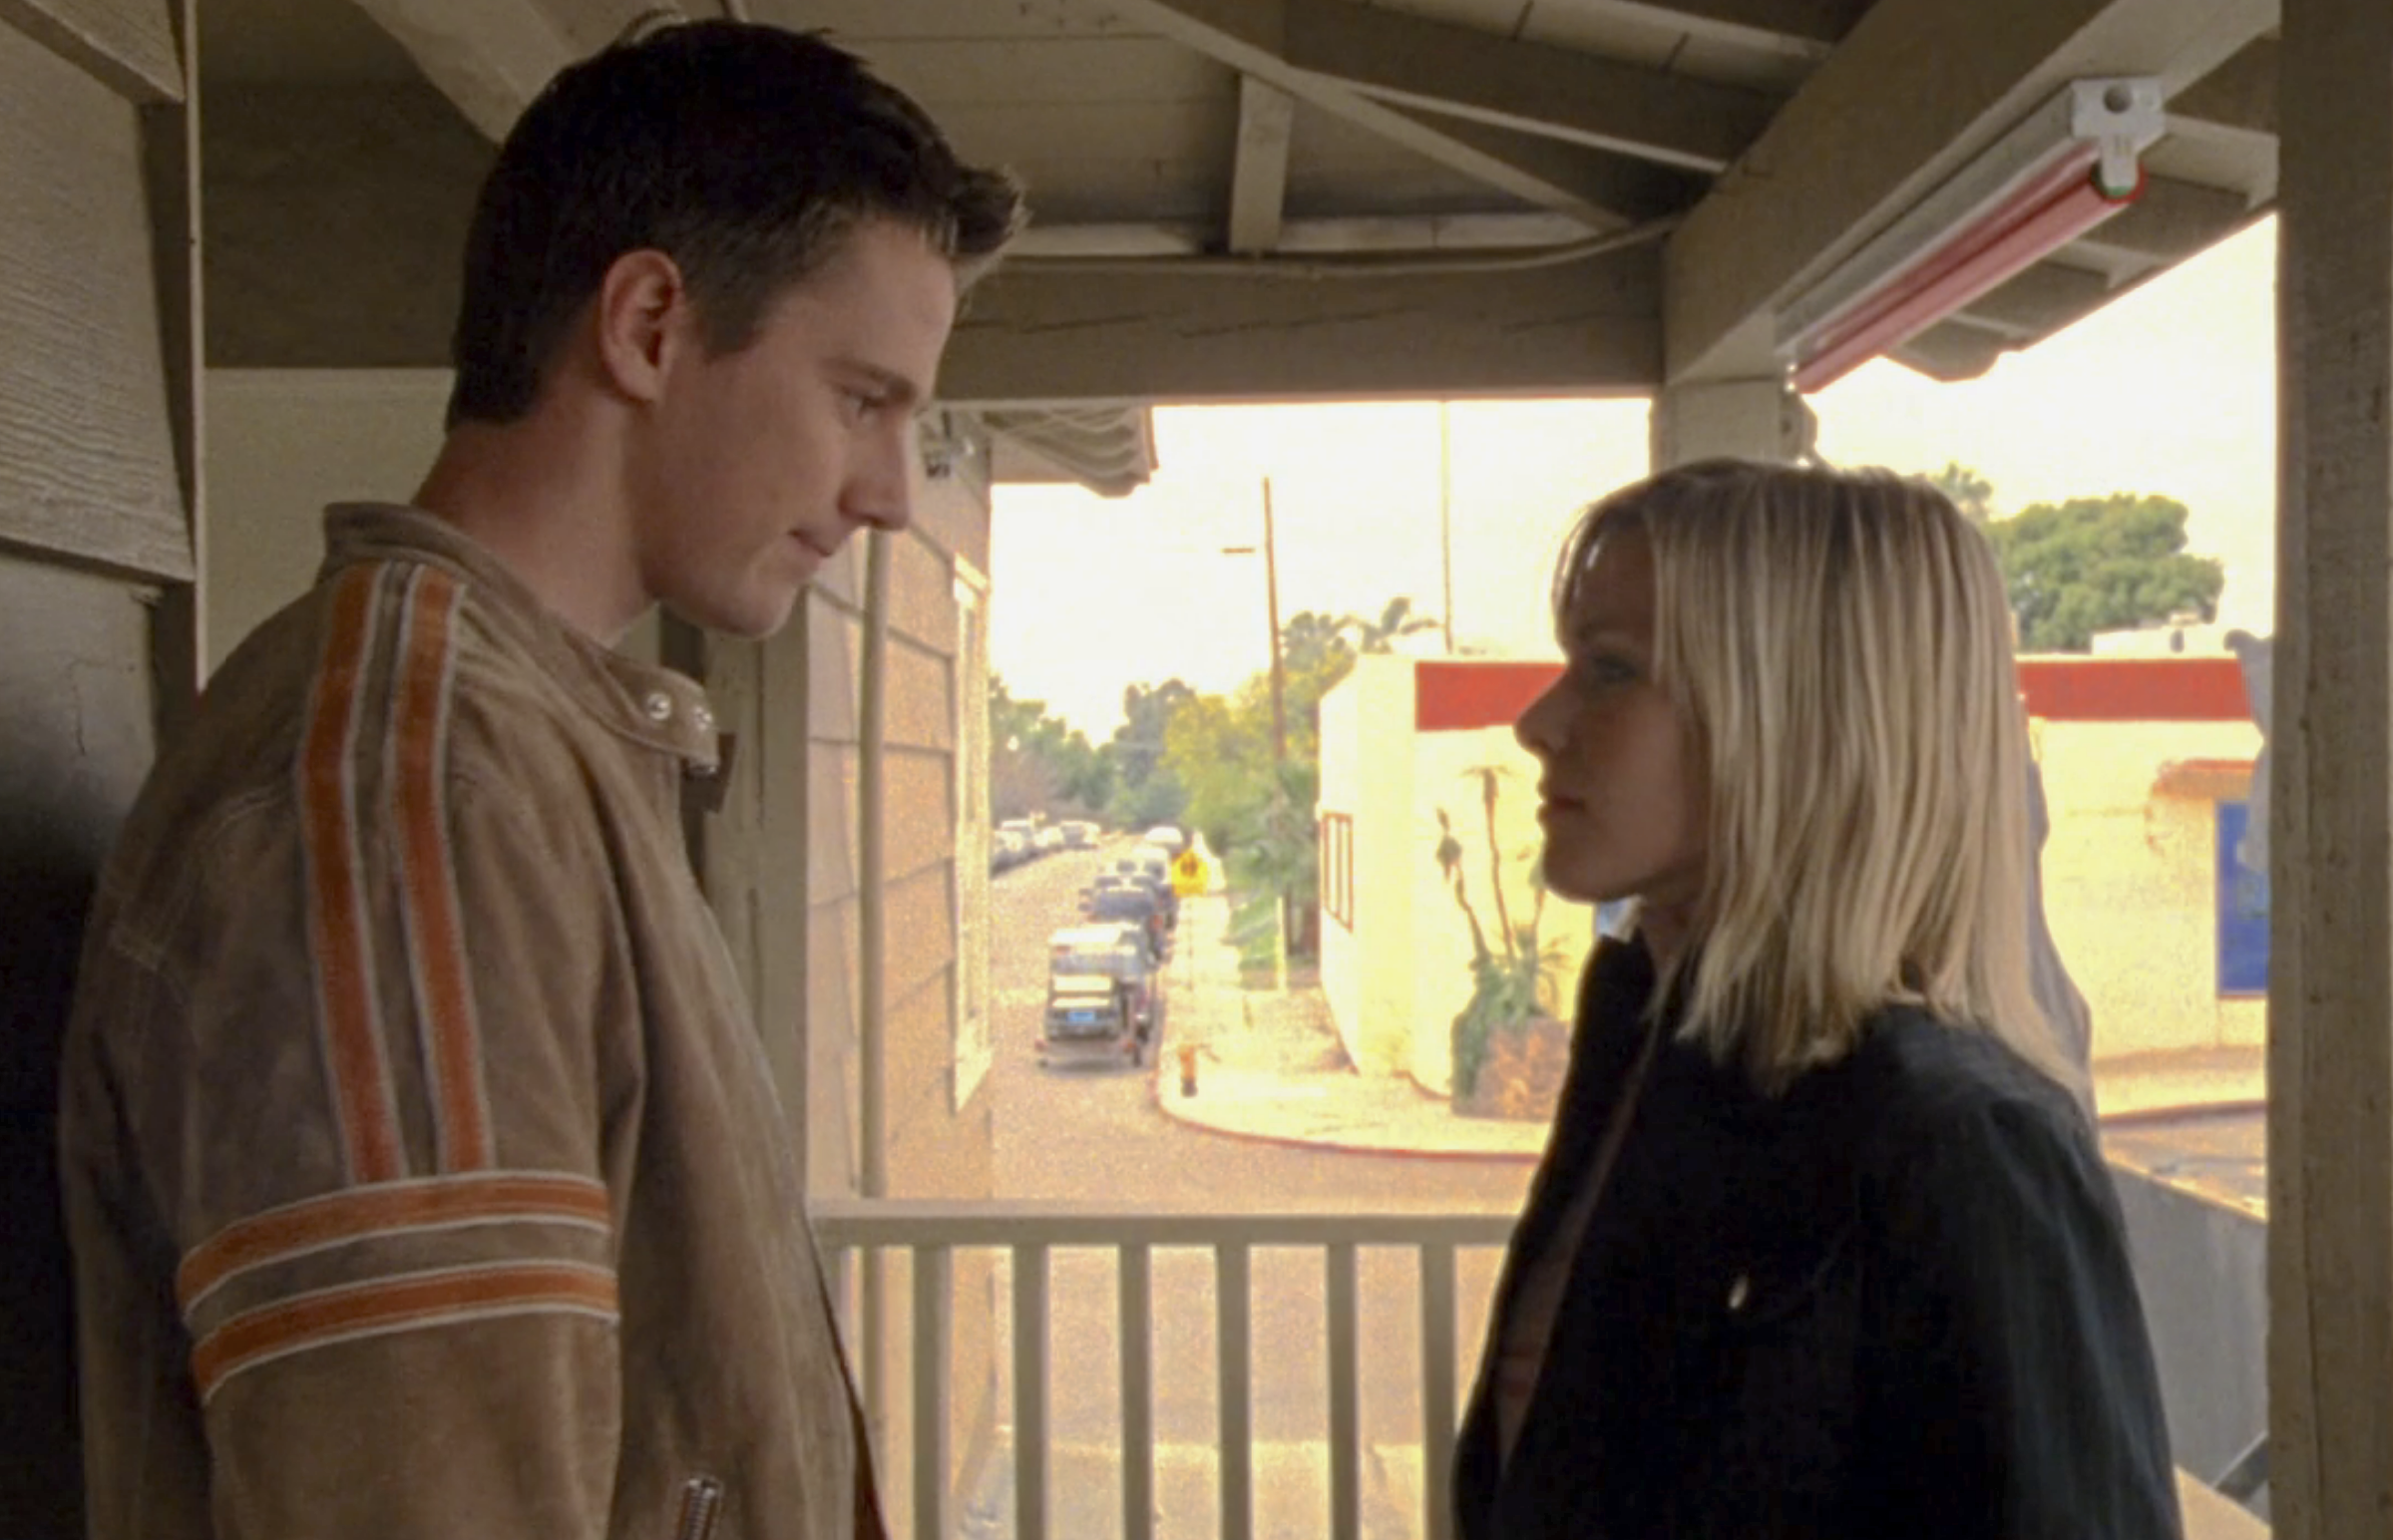 Screenshot from S1E18 of Veronica Mars. Logan and Veronica are facing each other standing on a hotel balcony.